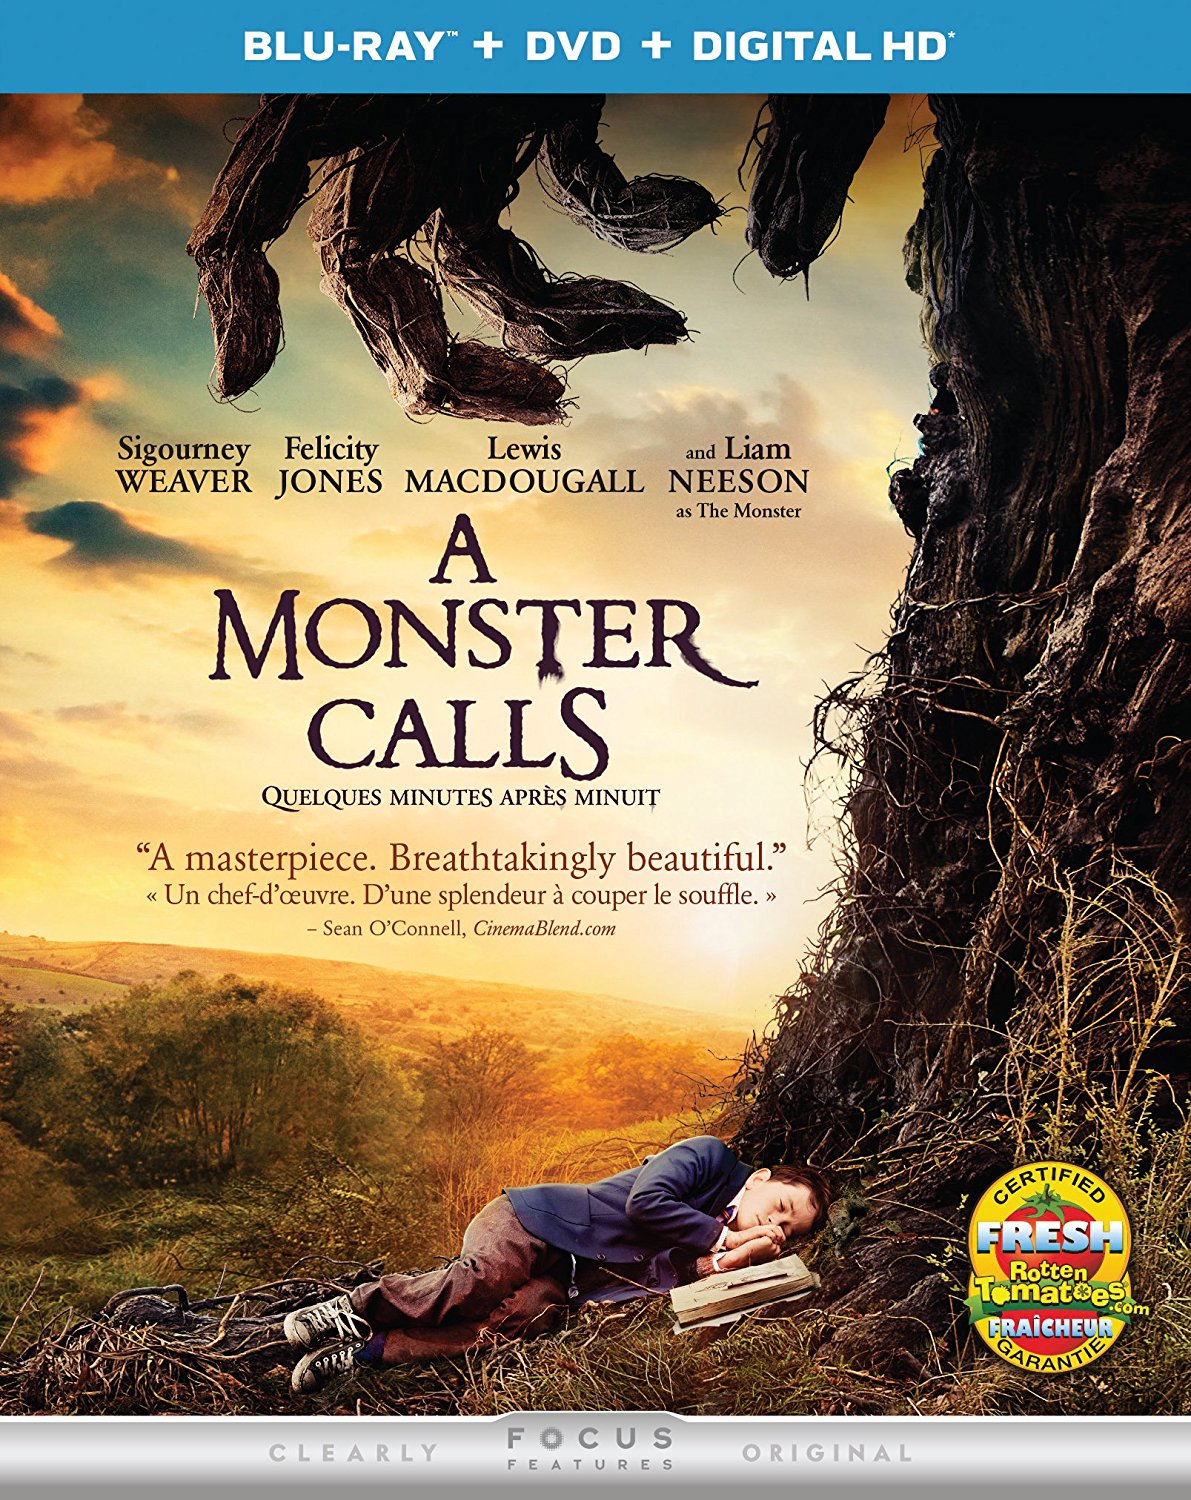 A Monster Calls – Blu-ray/DVD Combo Edition